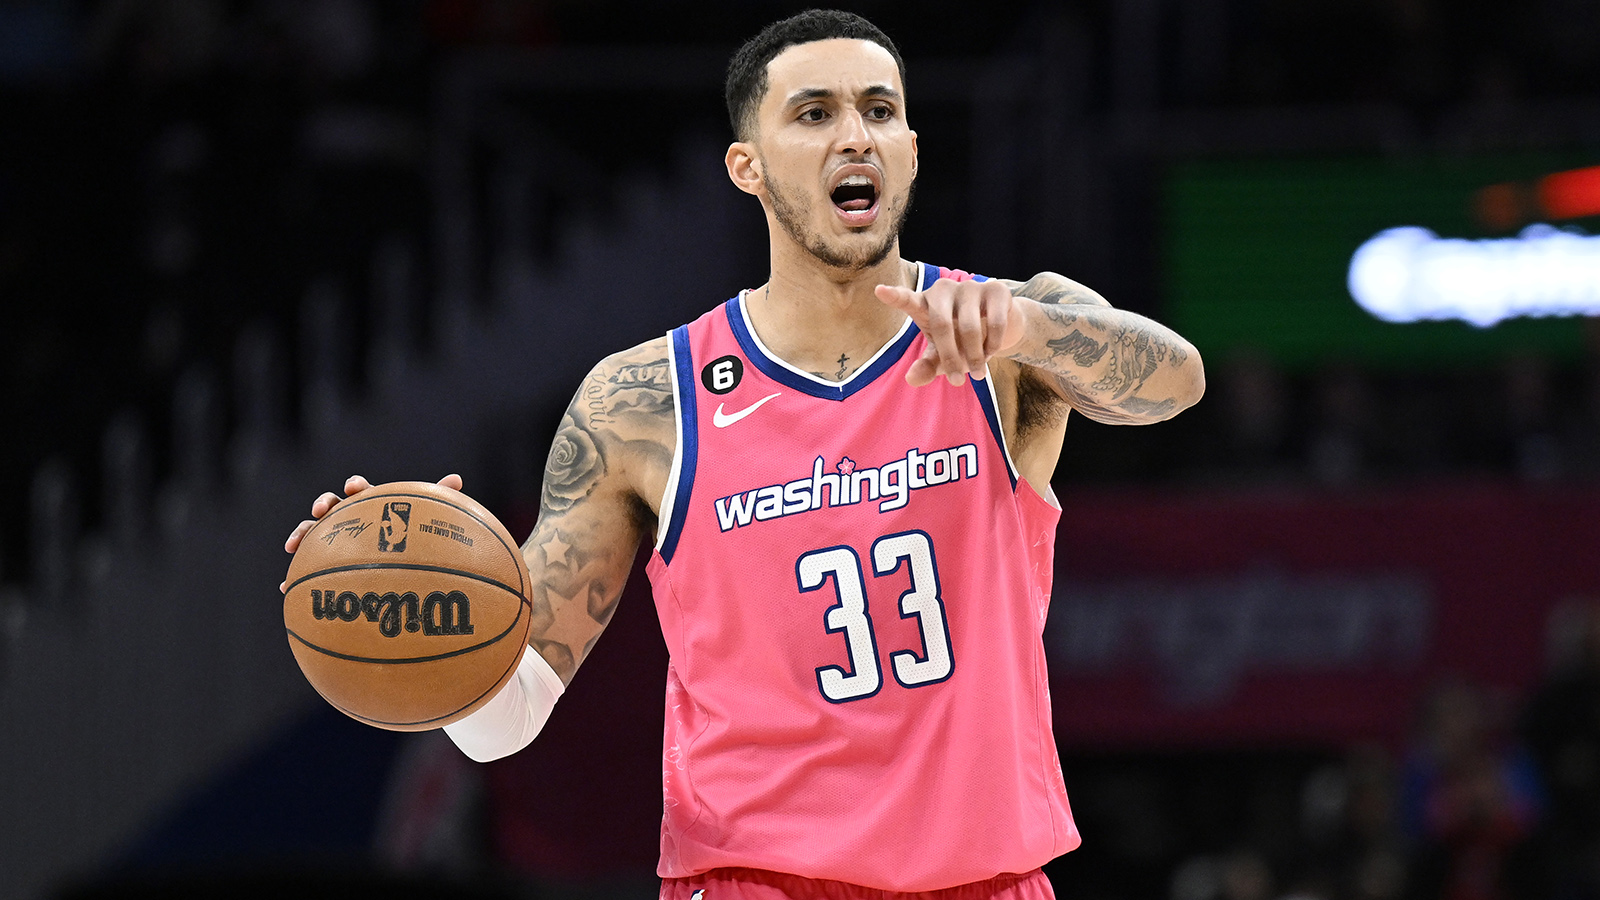 Kuzma, Wizards Are NBA's First to Reveal 2022-23 City Edition Jerseys